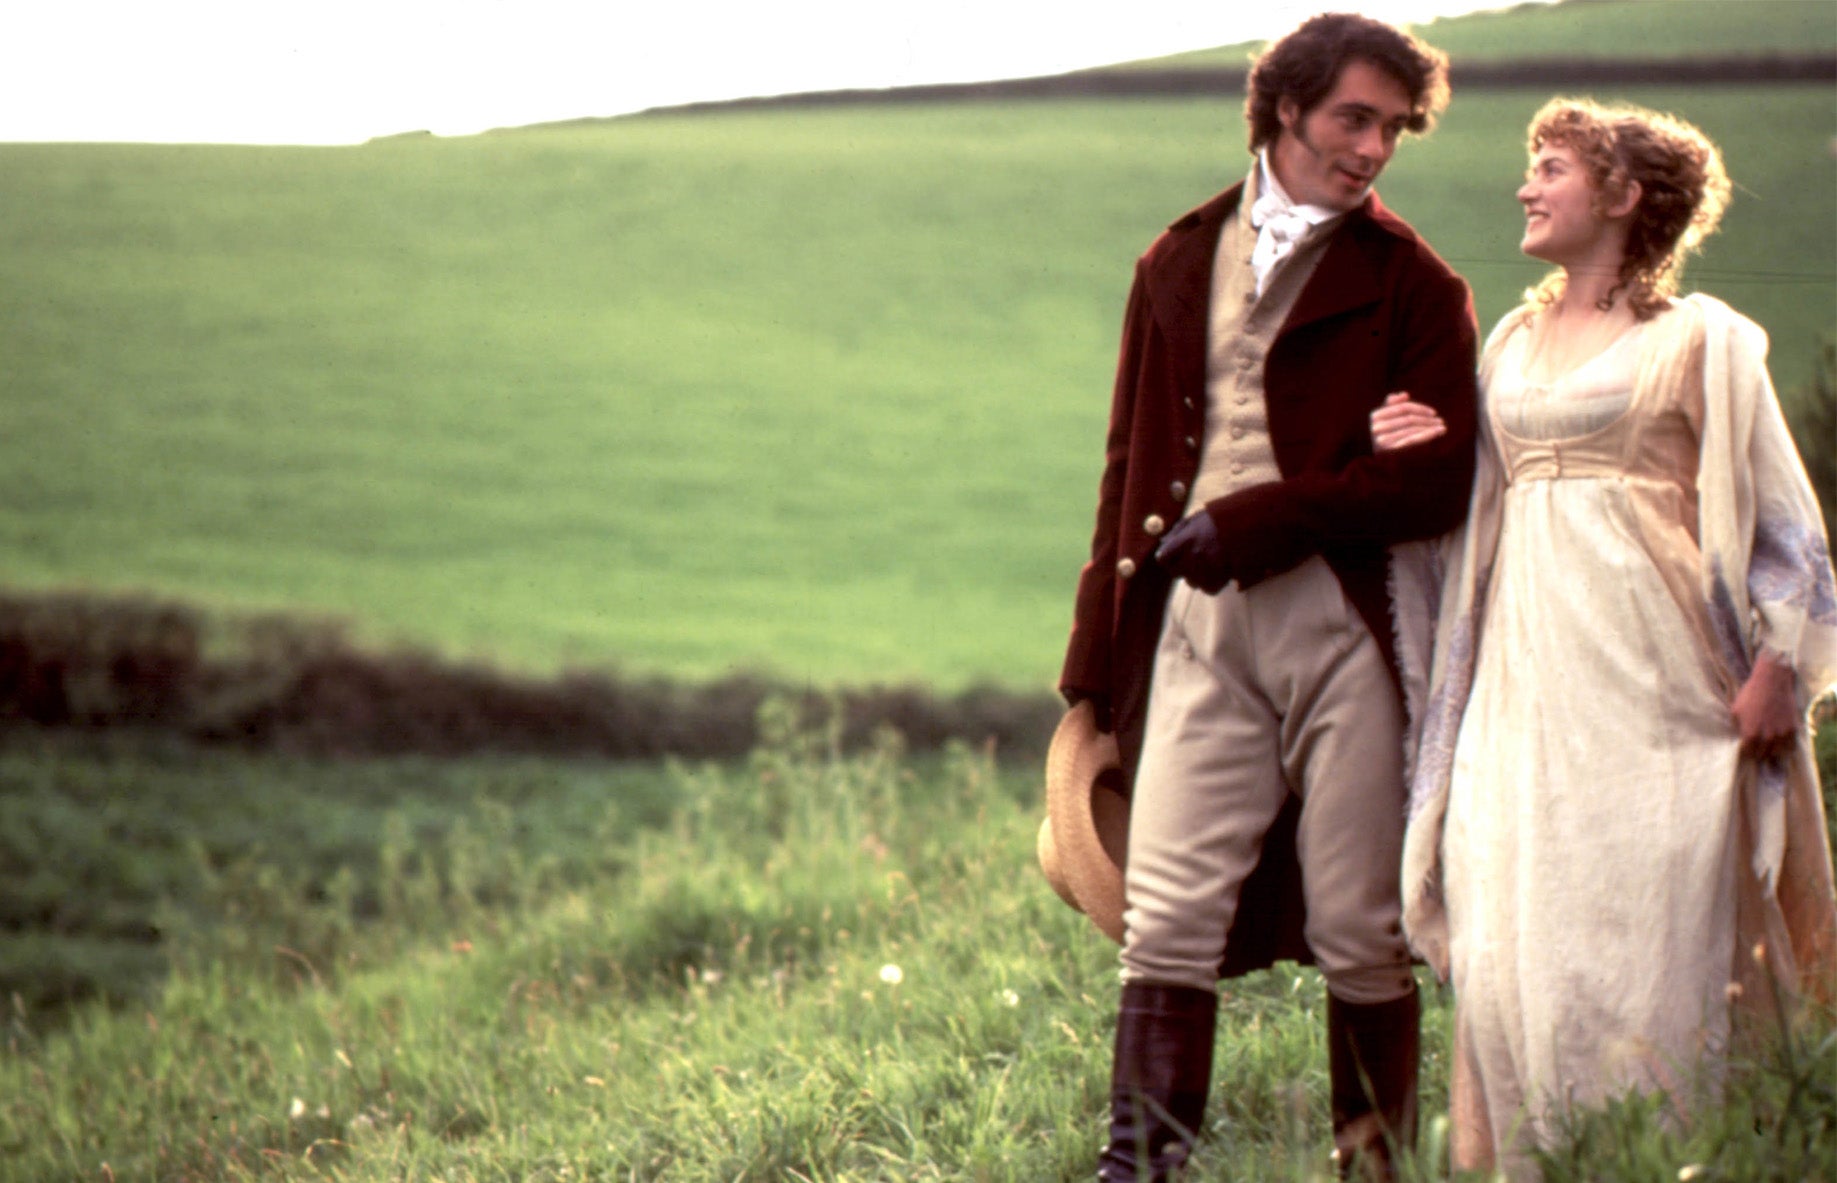 Greg Wise with Kate Winslet in Sense and Sensibility